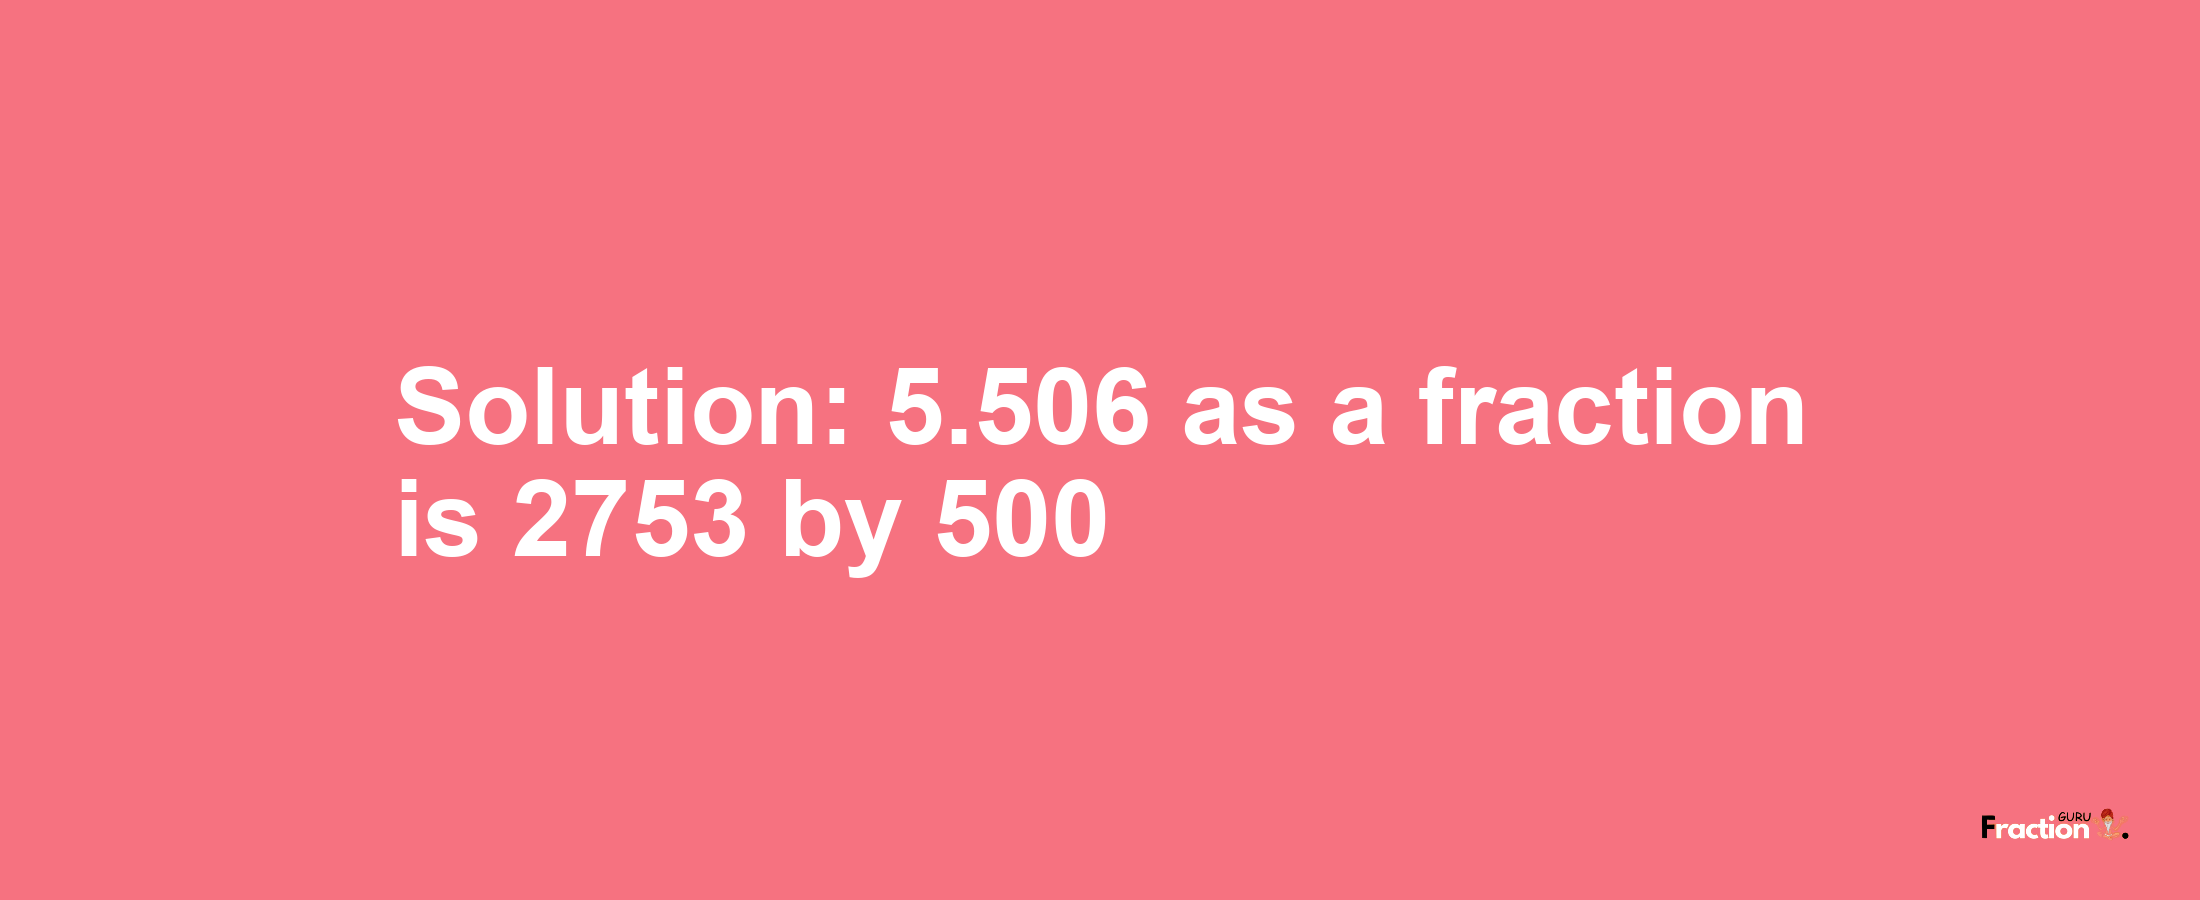 Solution:5.506 as a fraction is 2753/500